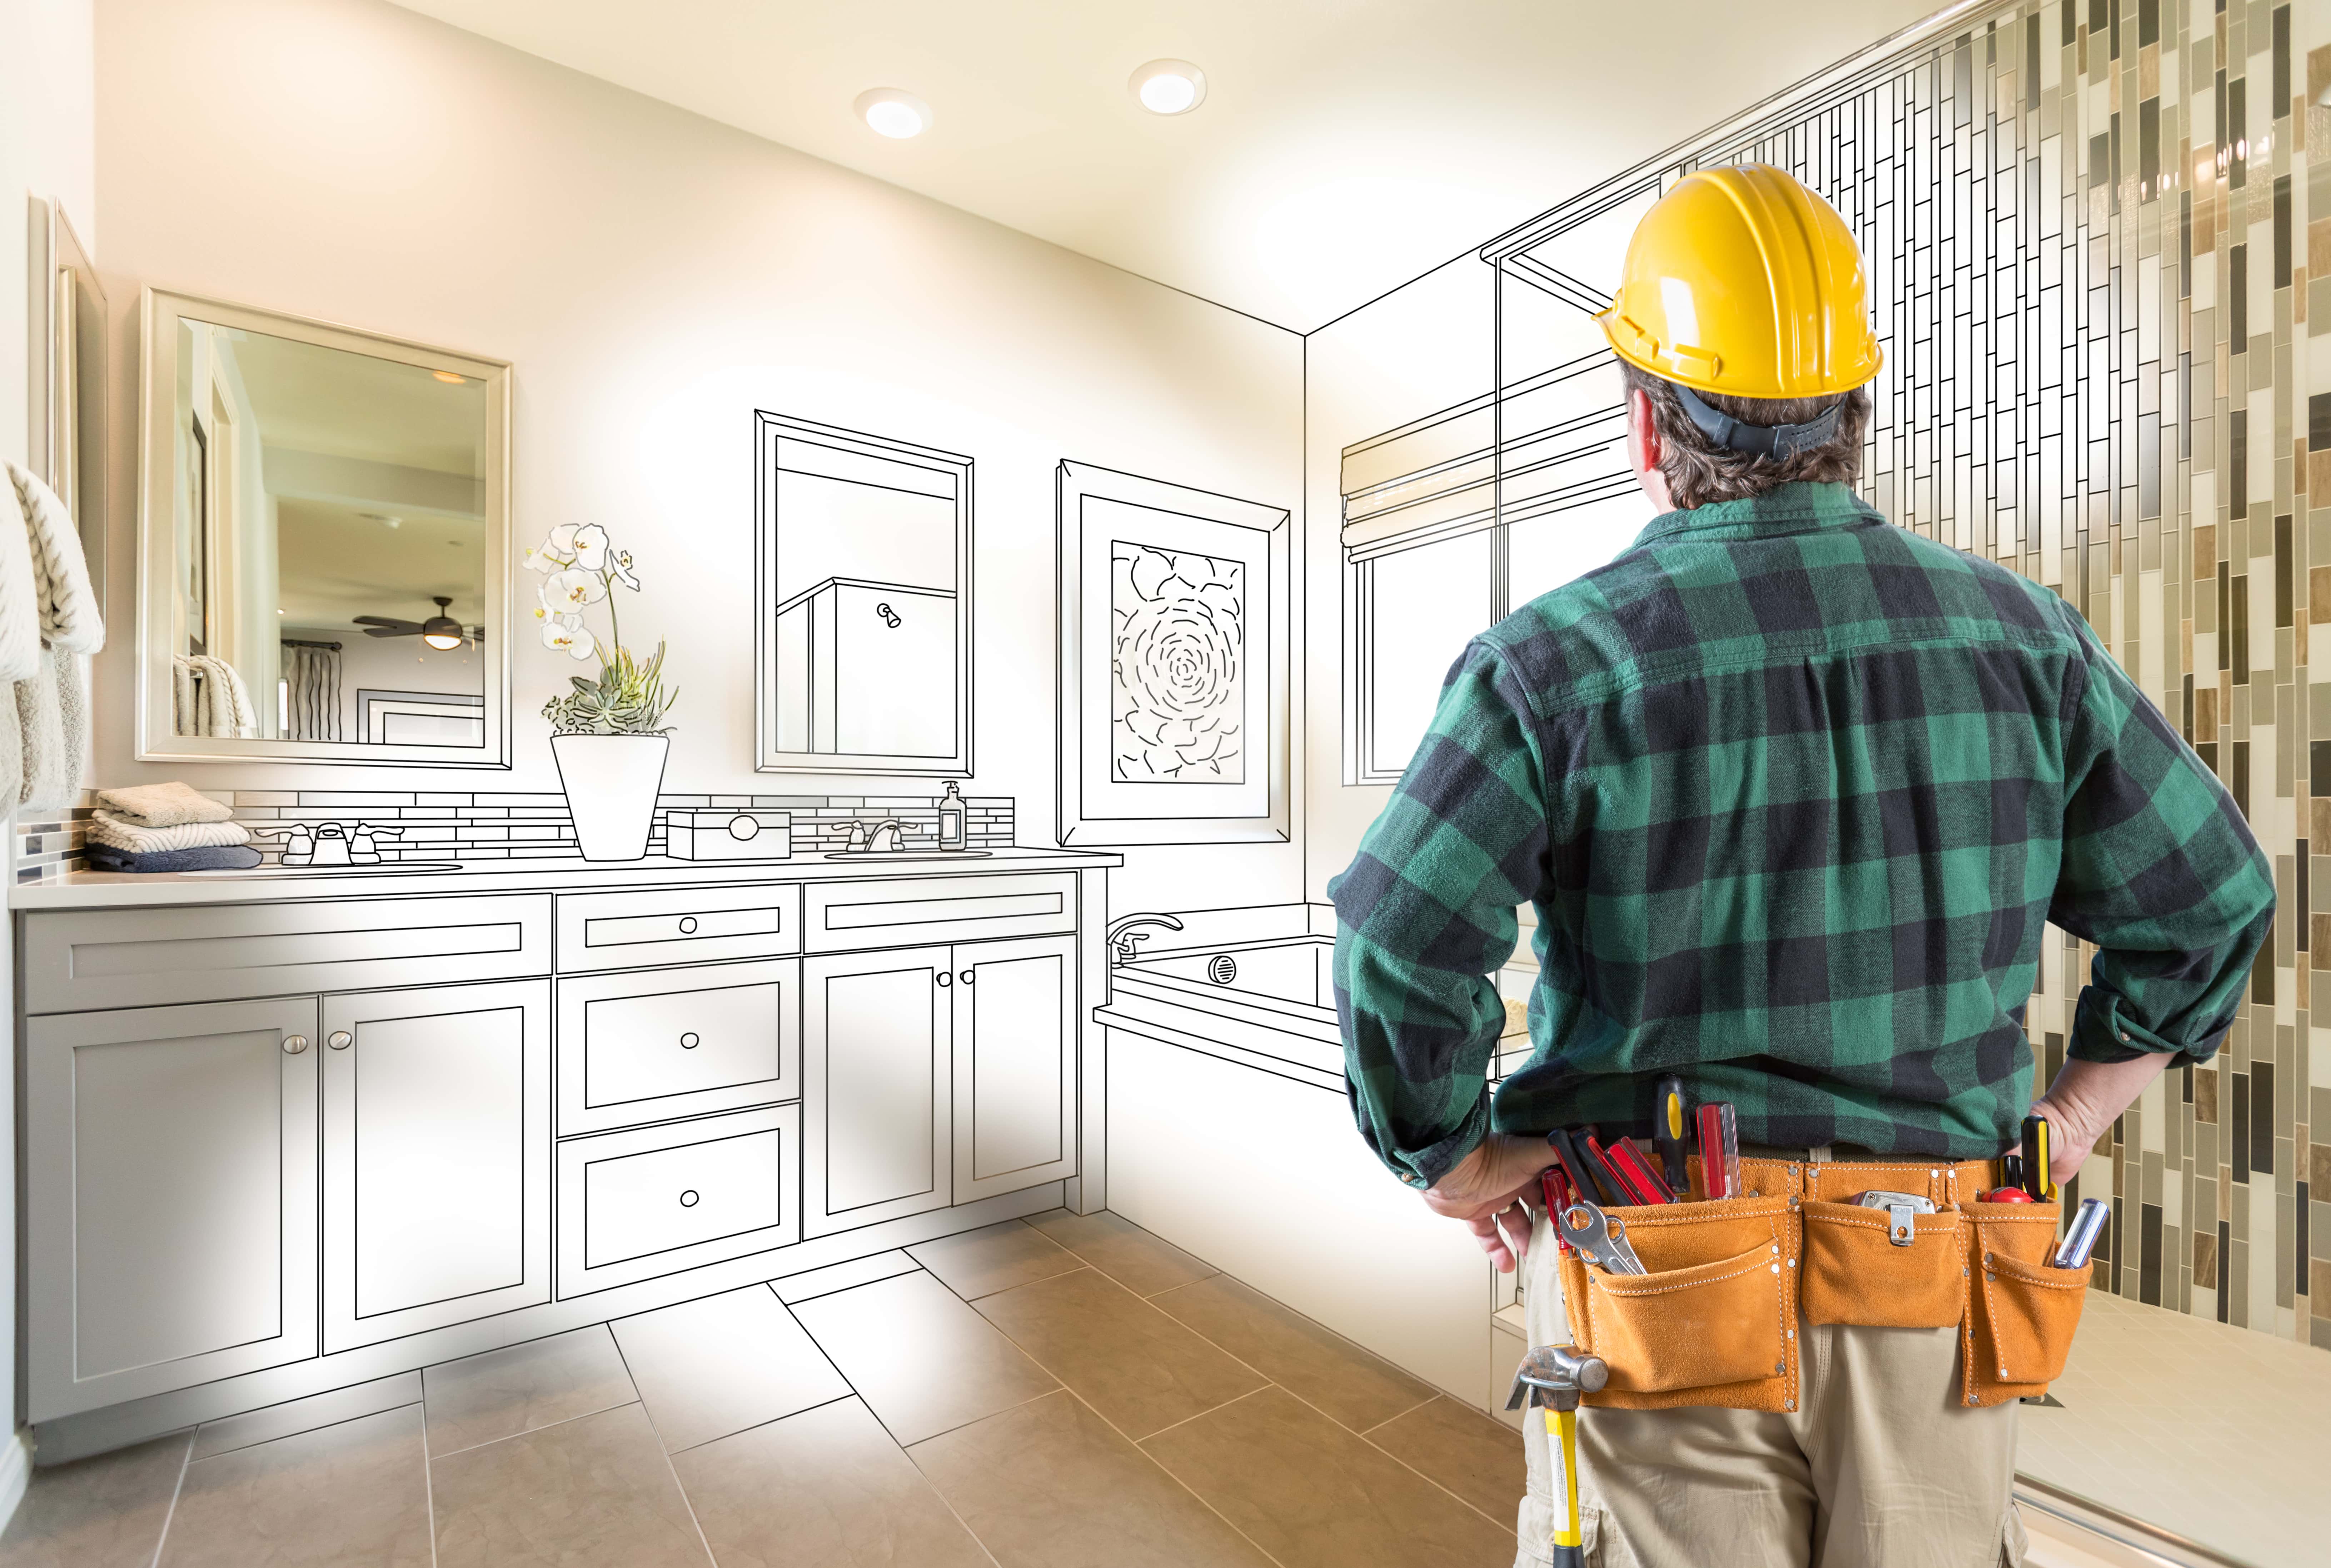 7 Questions to Ask Before Hiring a General Contractor - Lifeway Research